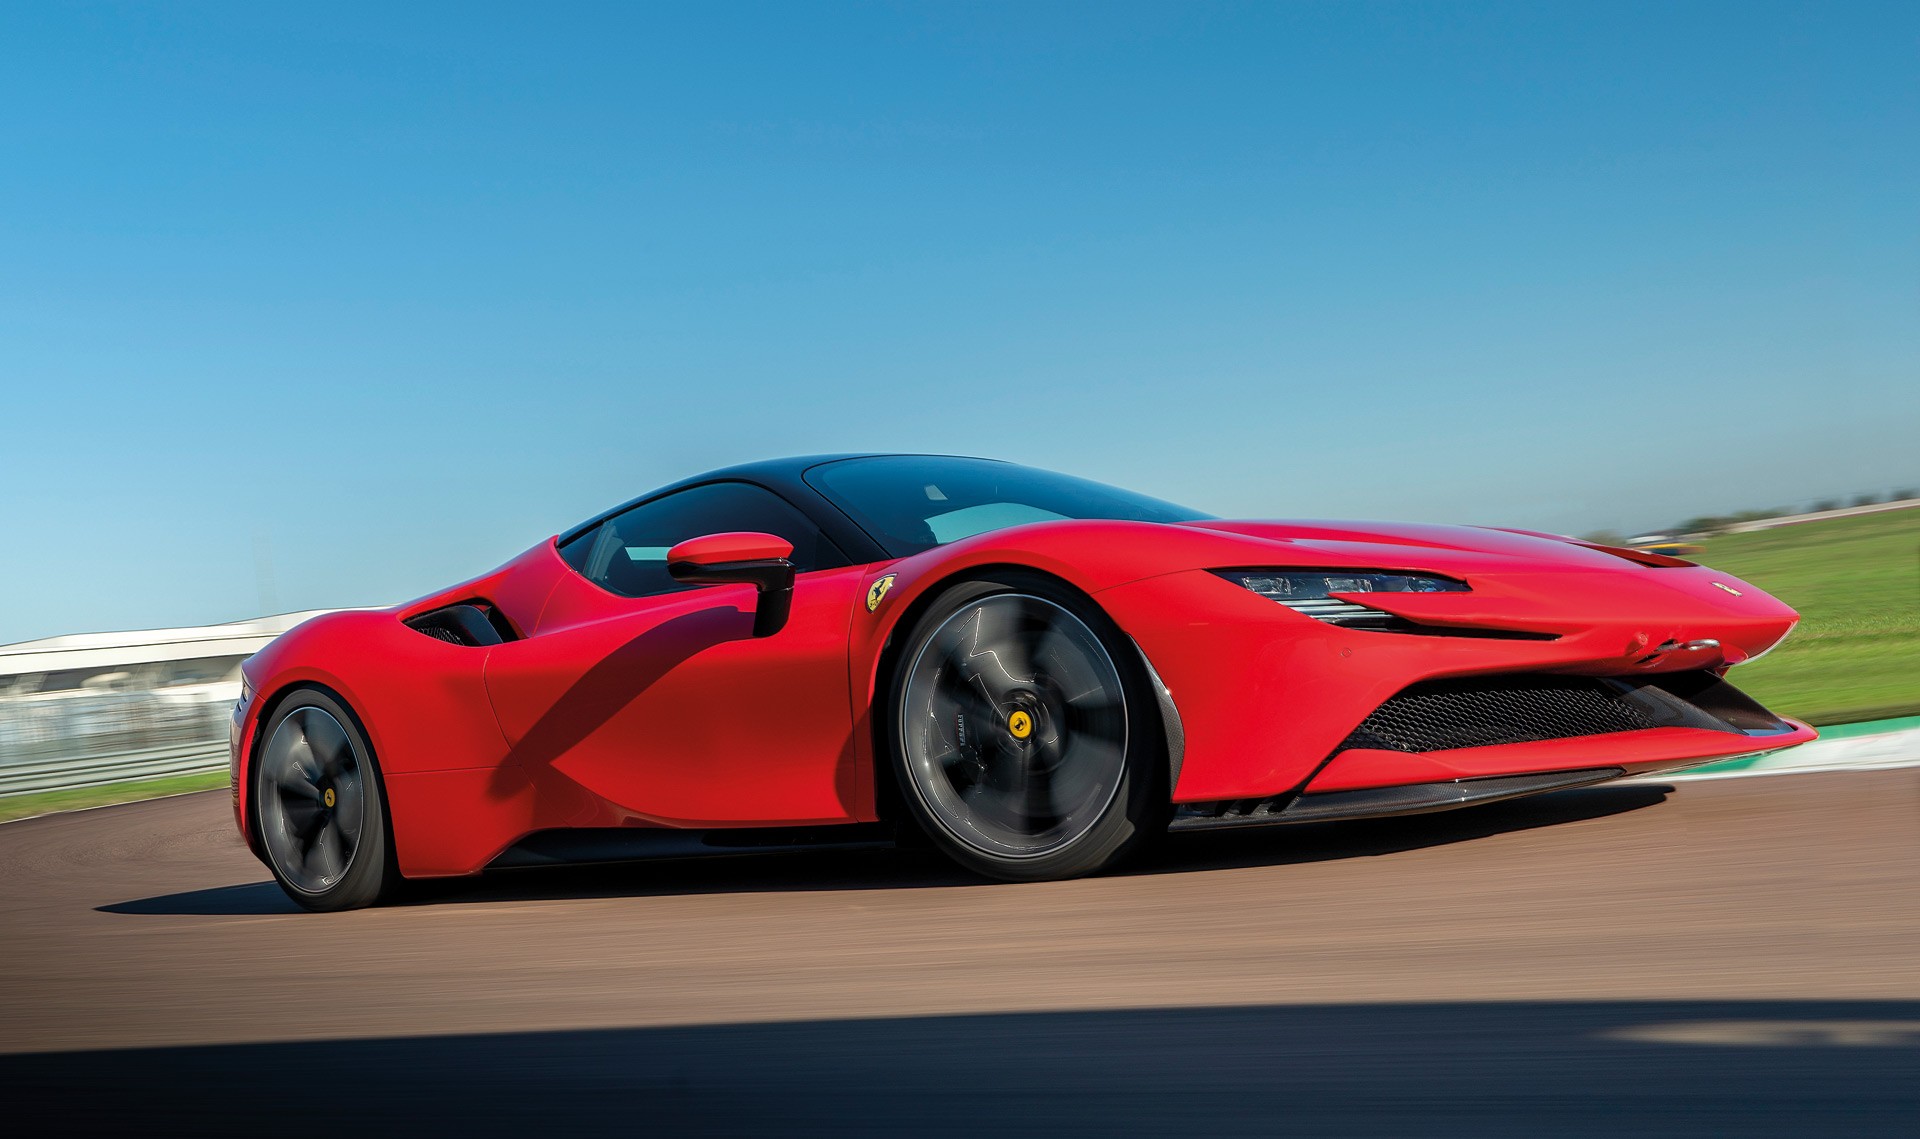 Ferrari SF90 Owners Urged Not to Drive Their Supercars